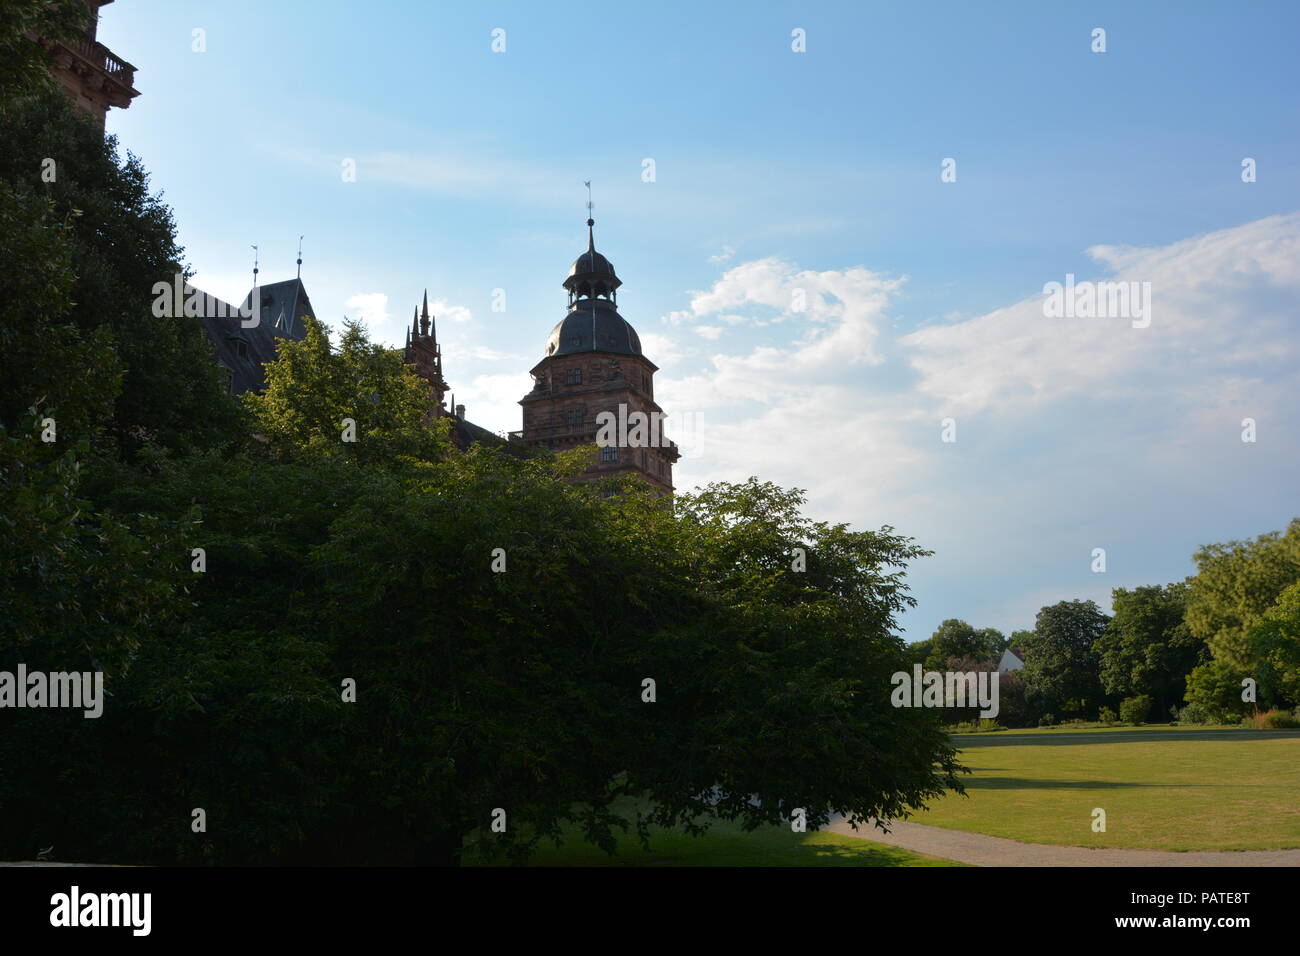 Johannisburg Castle in Aschaffenburg , Germany, Bavaria with blue sky and tree Stock Photo